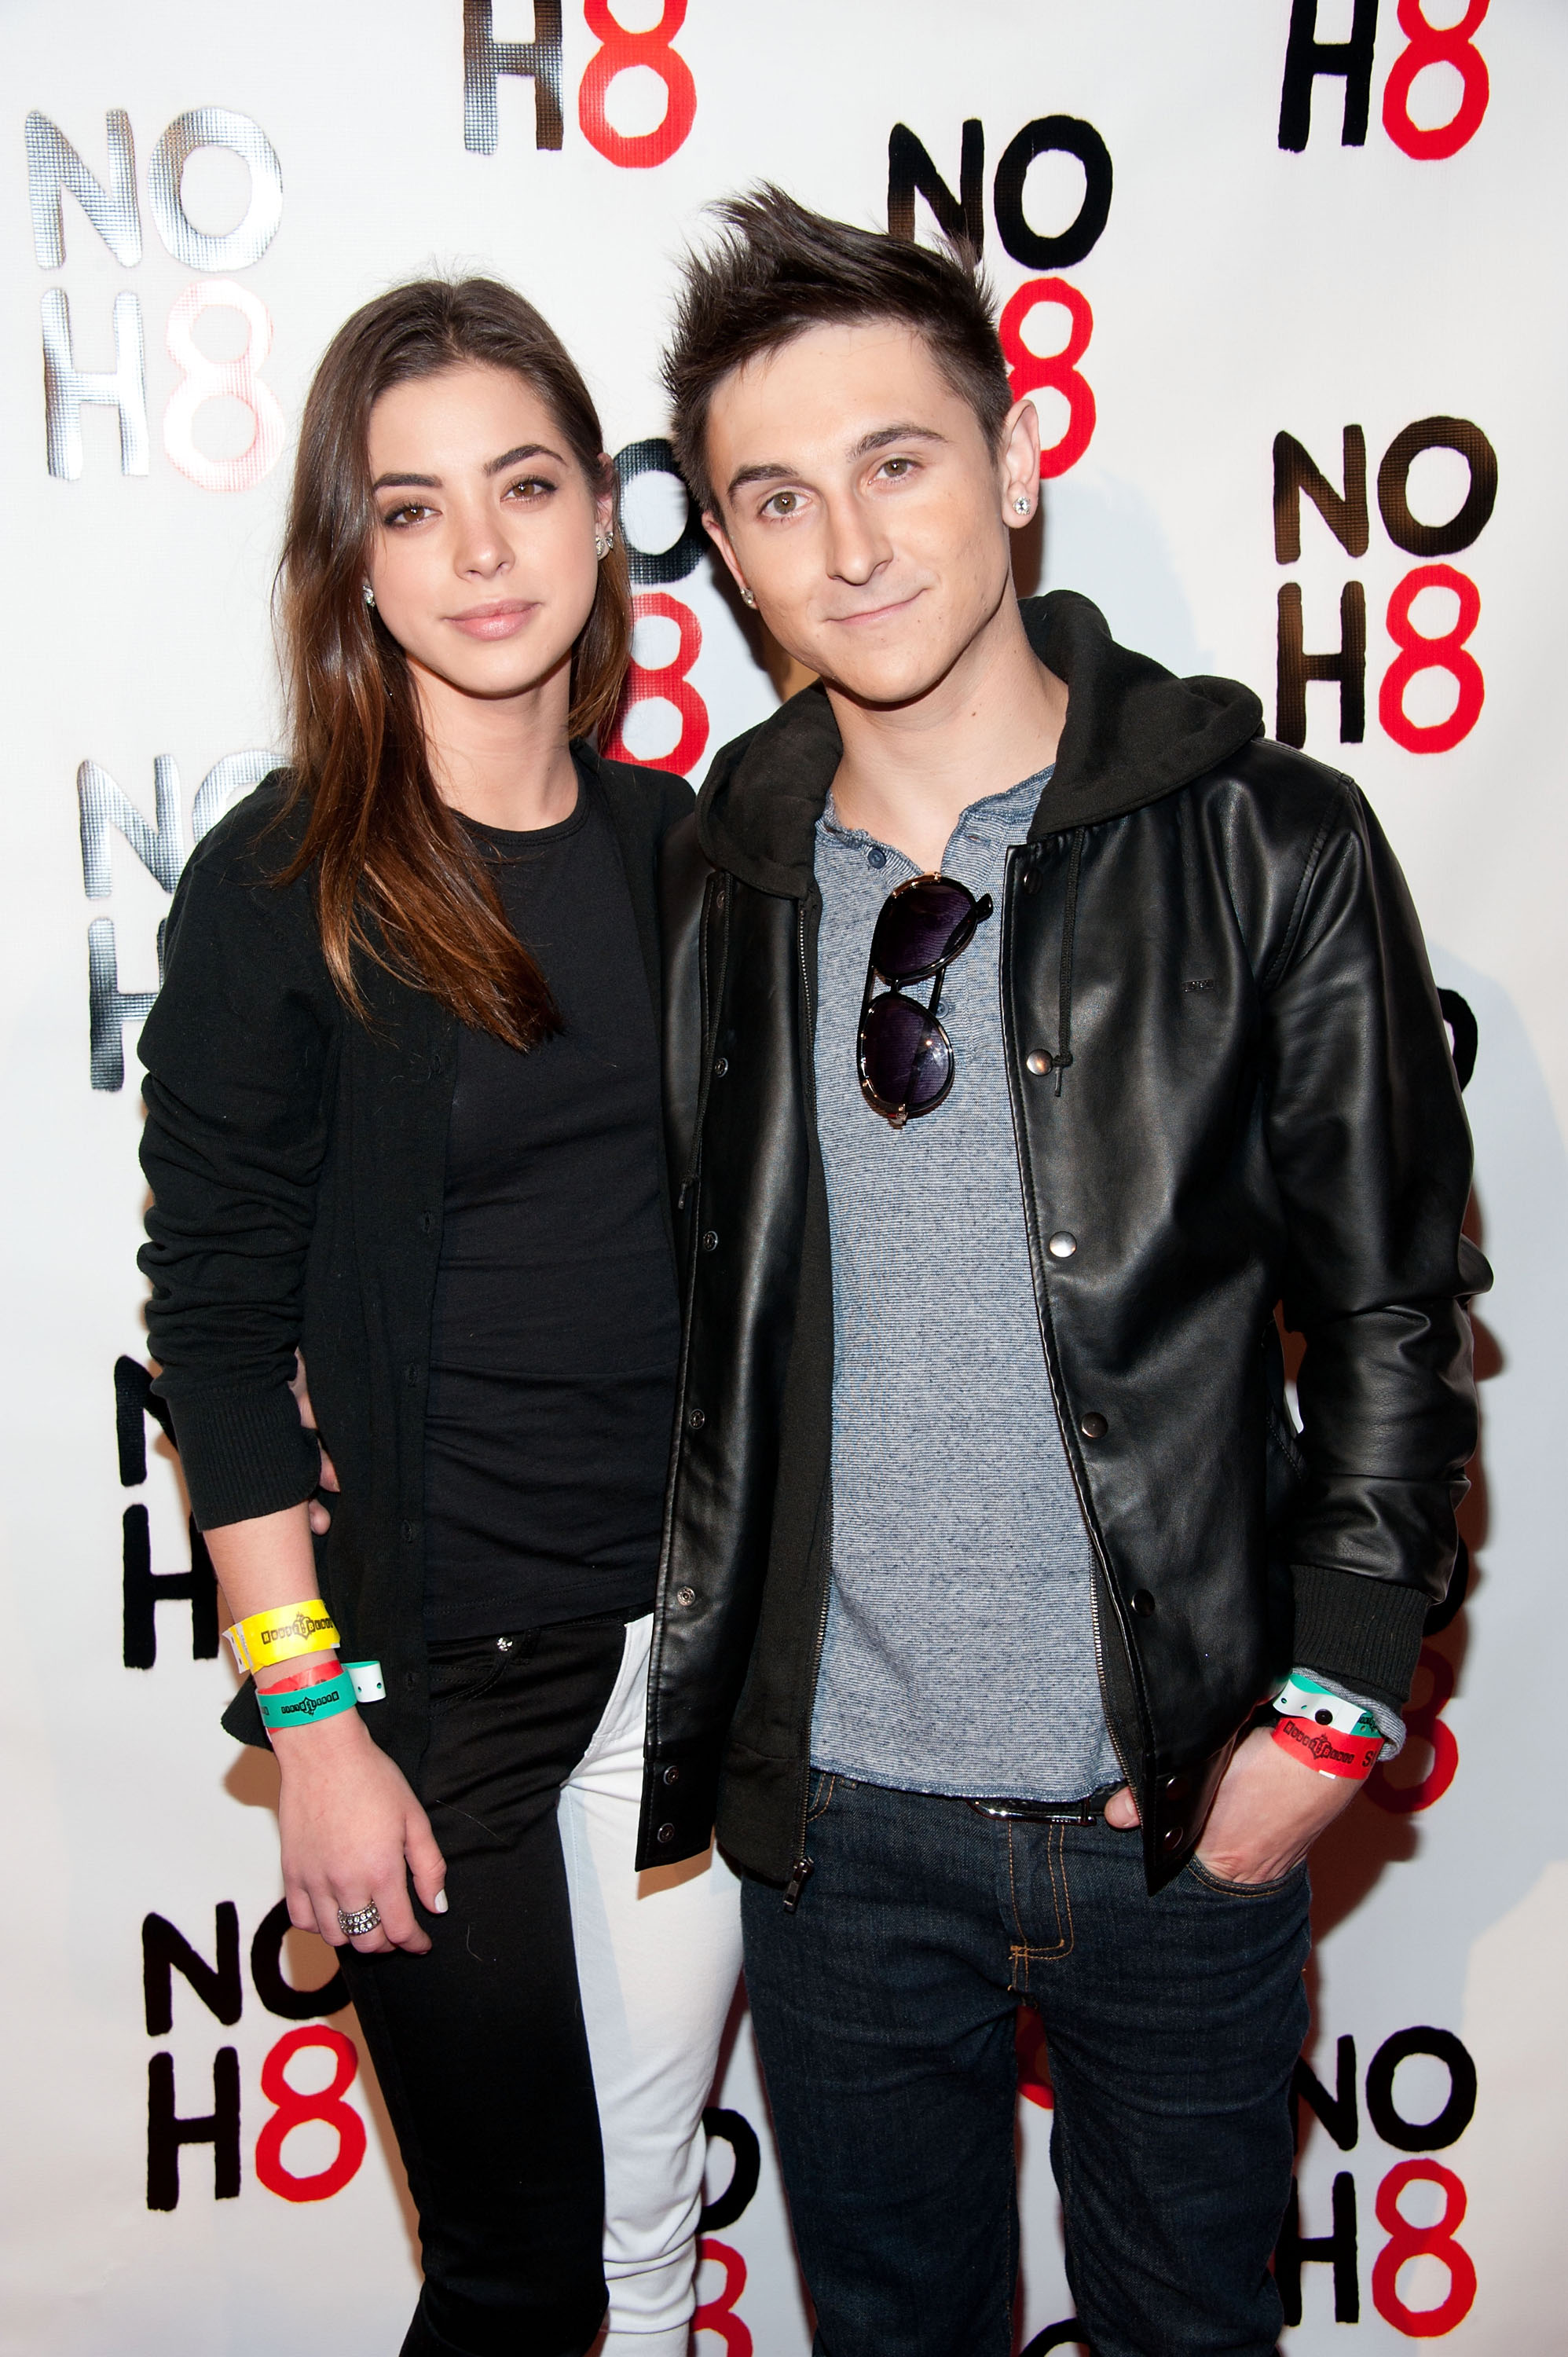 Gia Mantegna and Mitchel Musso arrive at the NOH8 Campaign's 3 Year Anniversary Celebration at House of Blues Sunset Strip on December 13, 2011, in West Hollywood, California. | Source: Getty Images